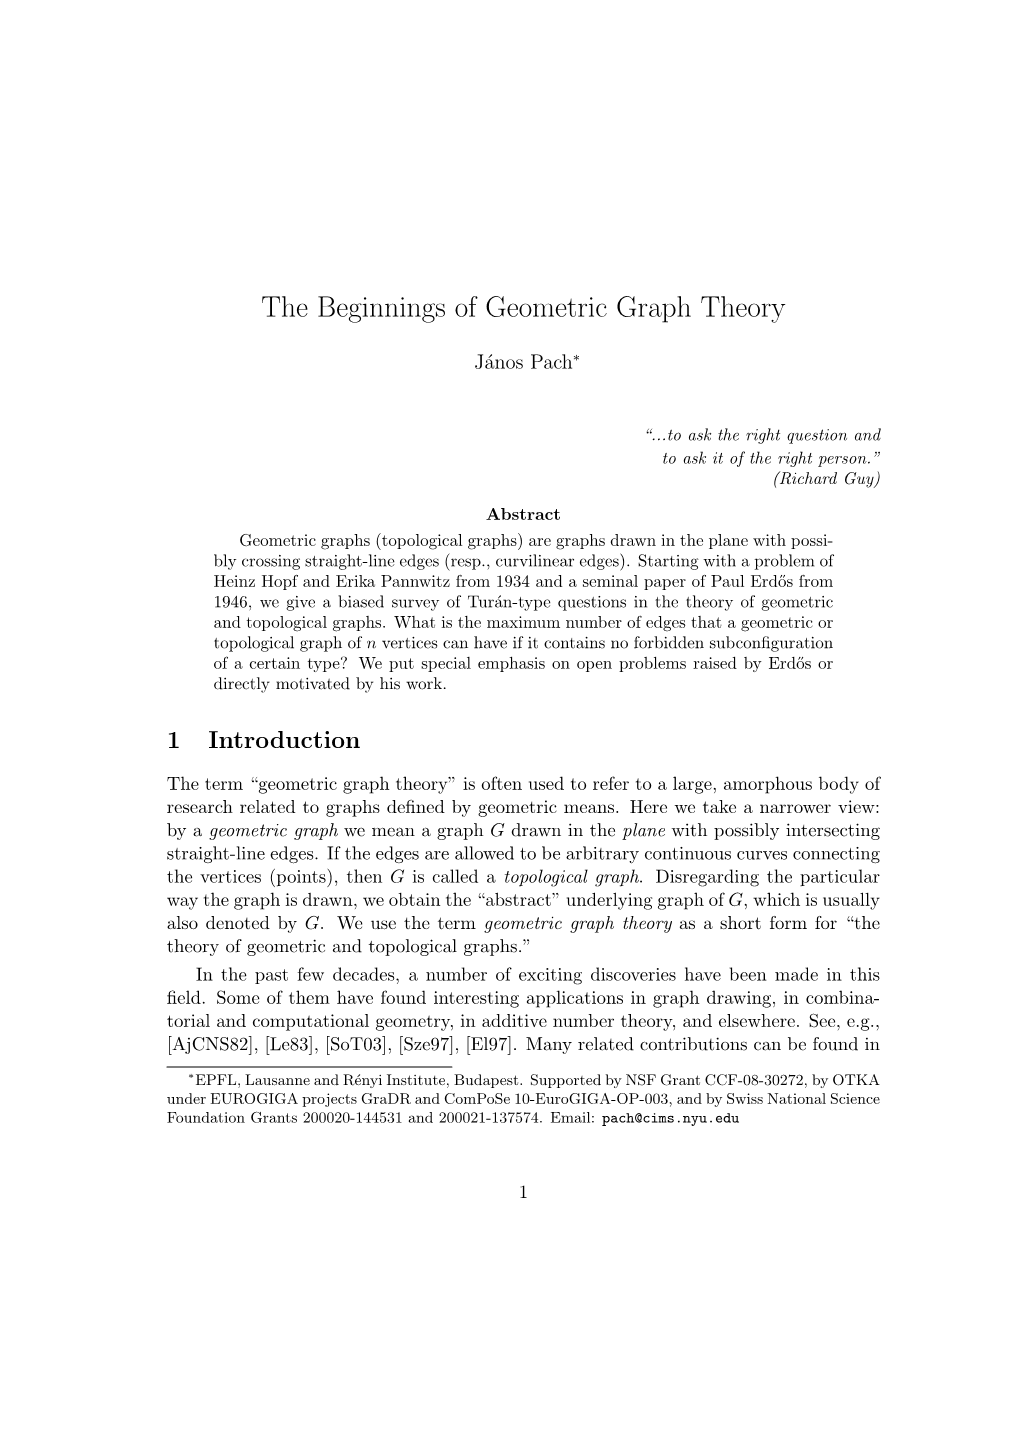 The Beginnings of Geometric Graph Theory